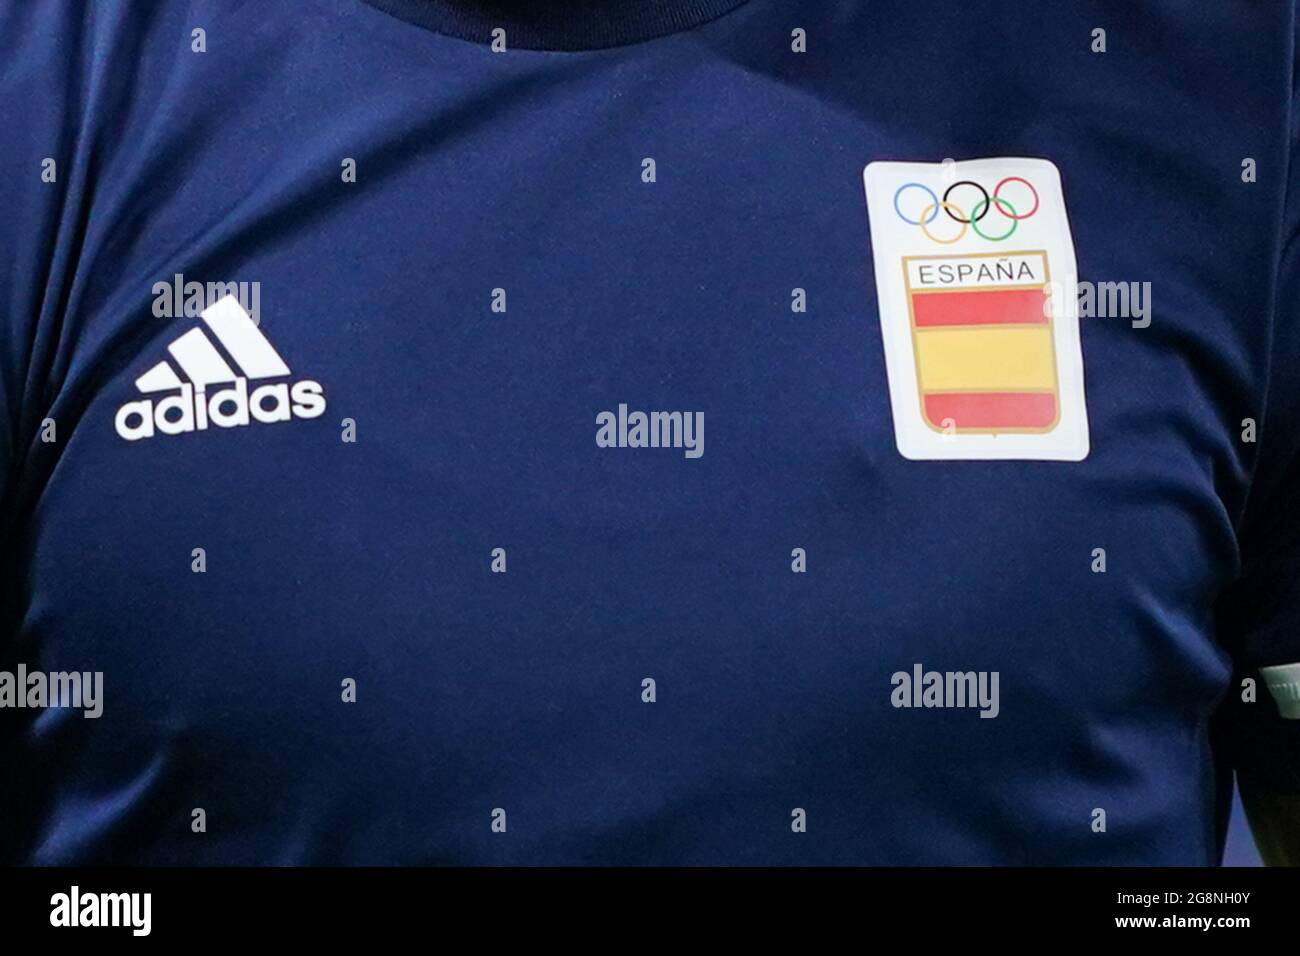 Sapporo, Japan. 22nd July, 2021. Shirt of Team Spain with Olympic logo and  their sponsor Adidas during the Men's Olympic Football Tournament Tokyo 2020  match between Egypt and Spain at Sapporo Dome